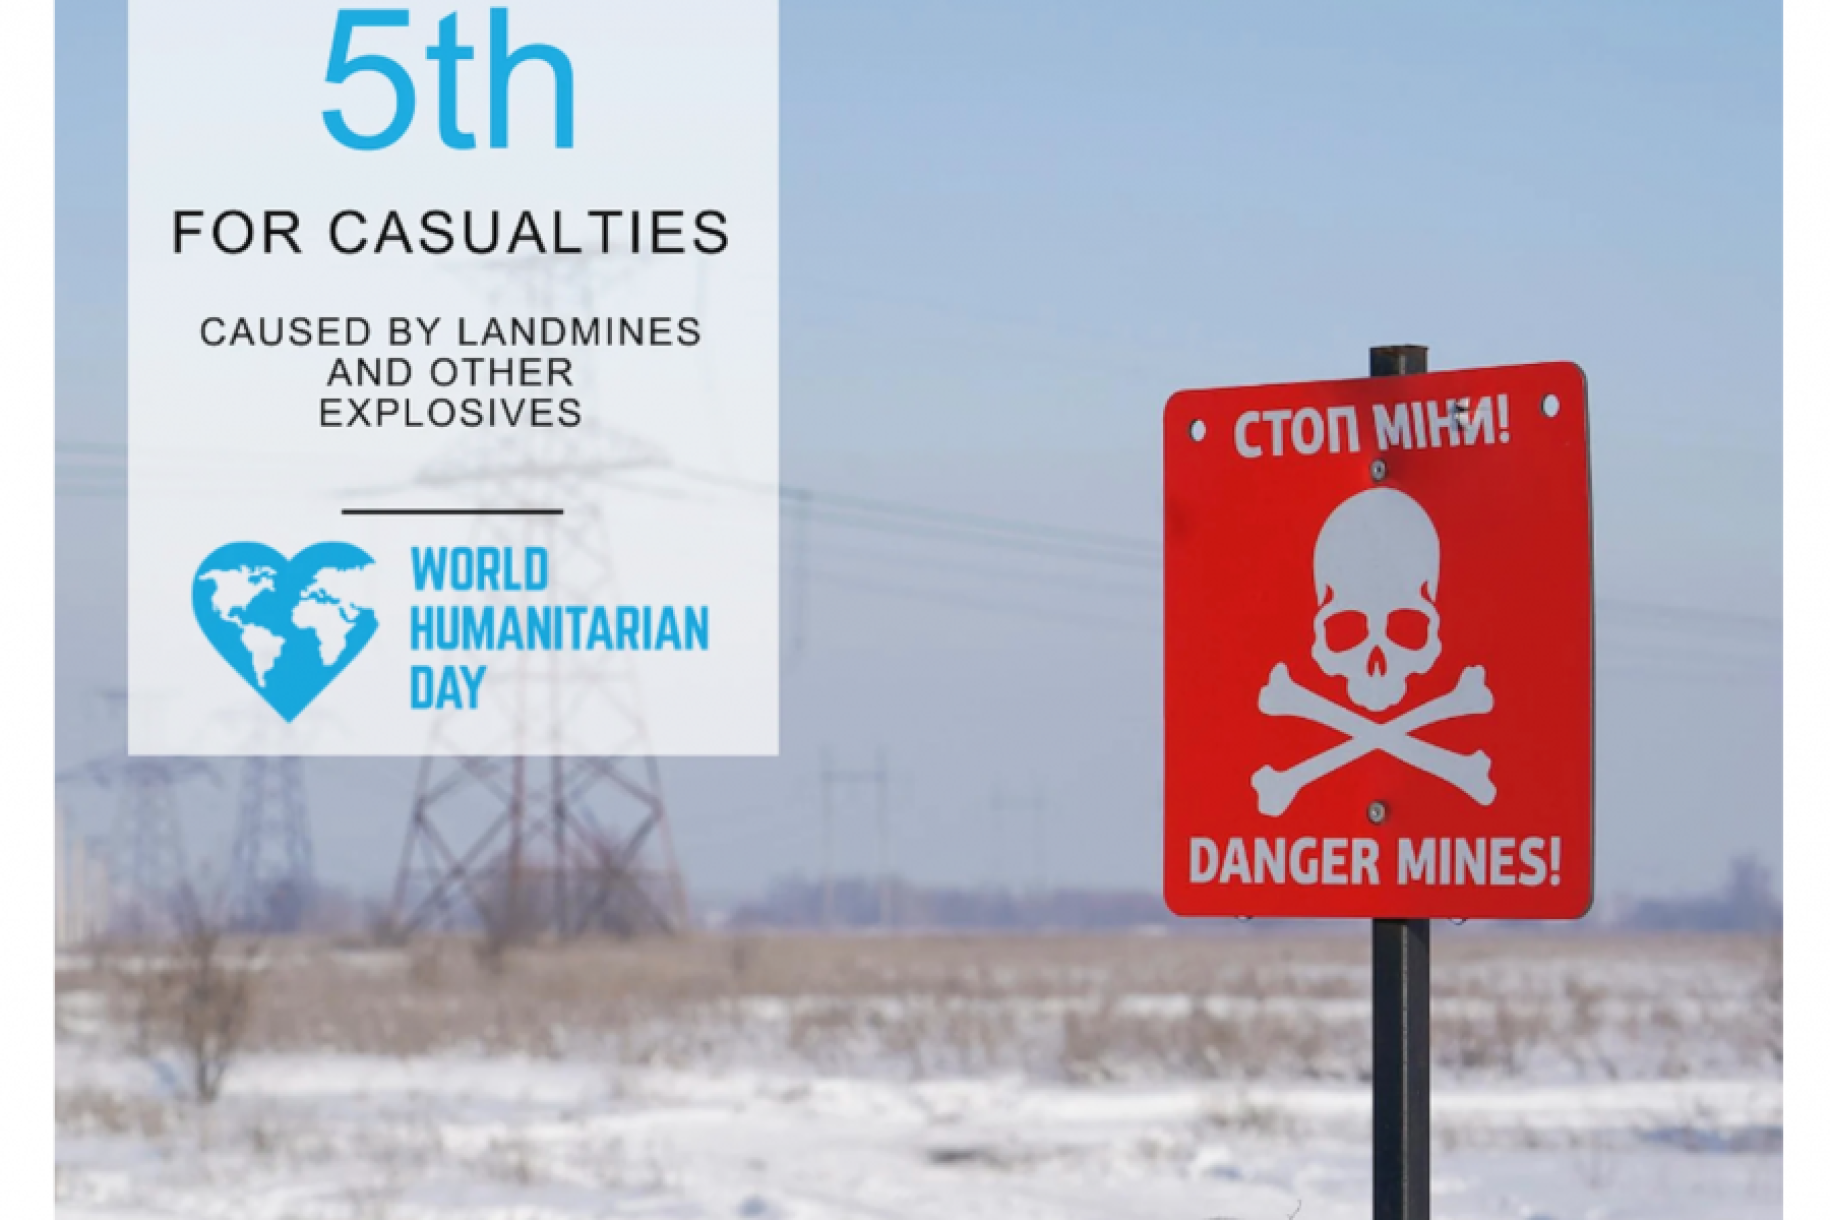 Photo of a warning signs with a scull and crossbones reads: Danger mines. To the left is a factoid that states 5th for casualties caused by landmines and other explosives.